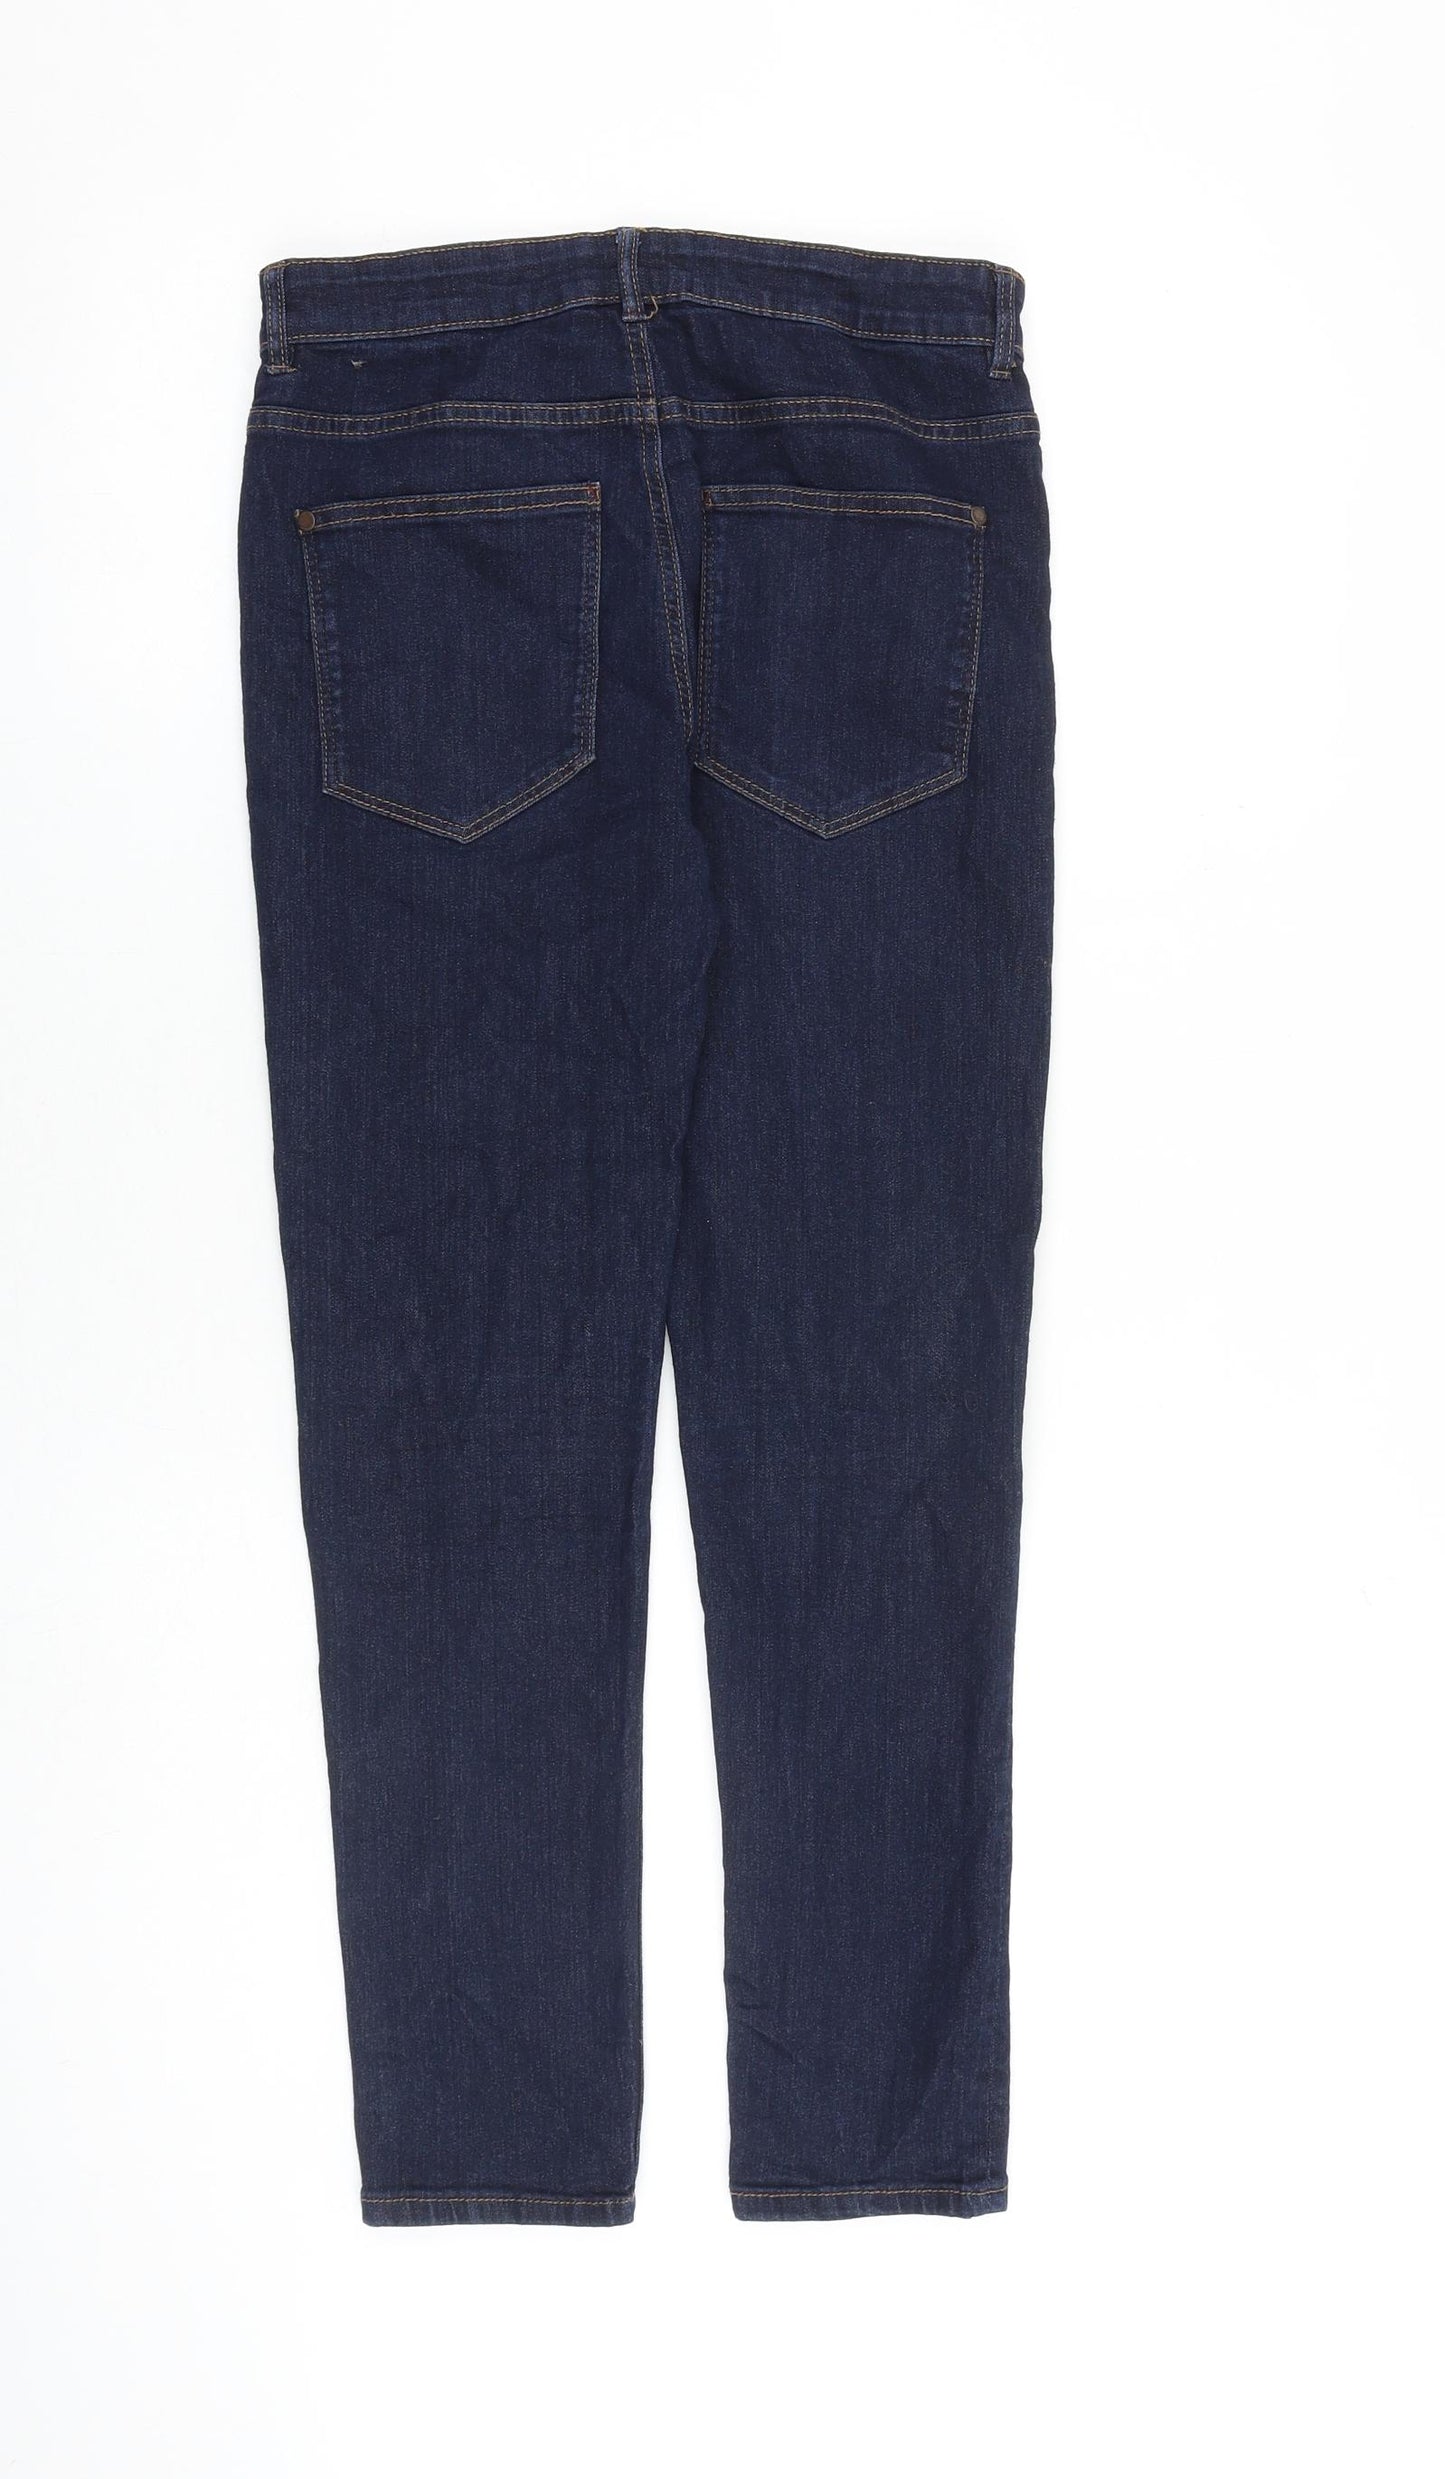 Marks and Spencer Boys Blue Cotton Skinny Jeans Size 13 Years L26 in Regular Zip